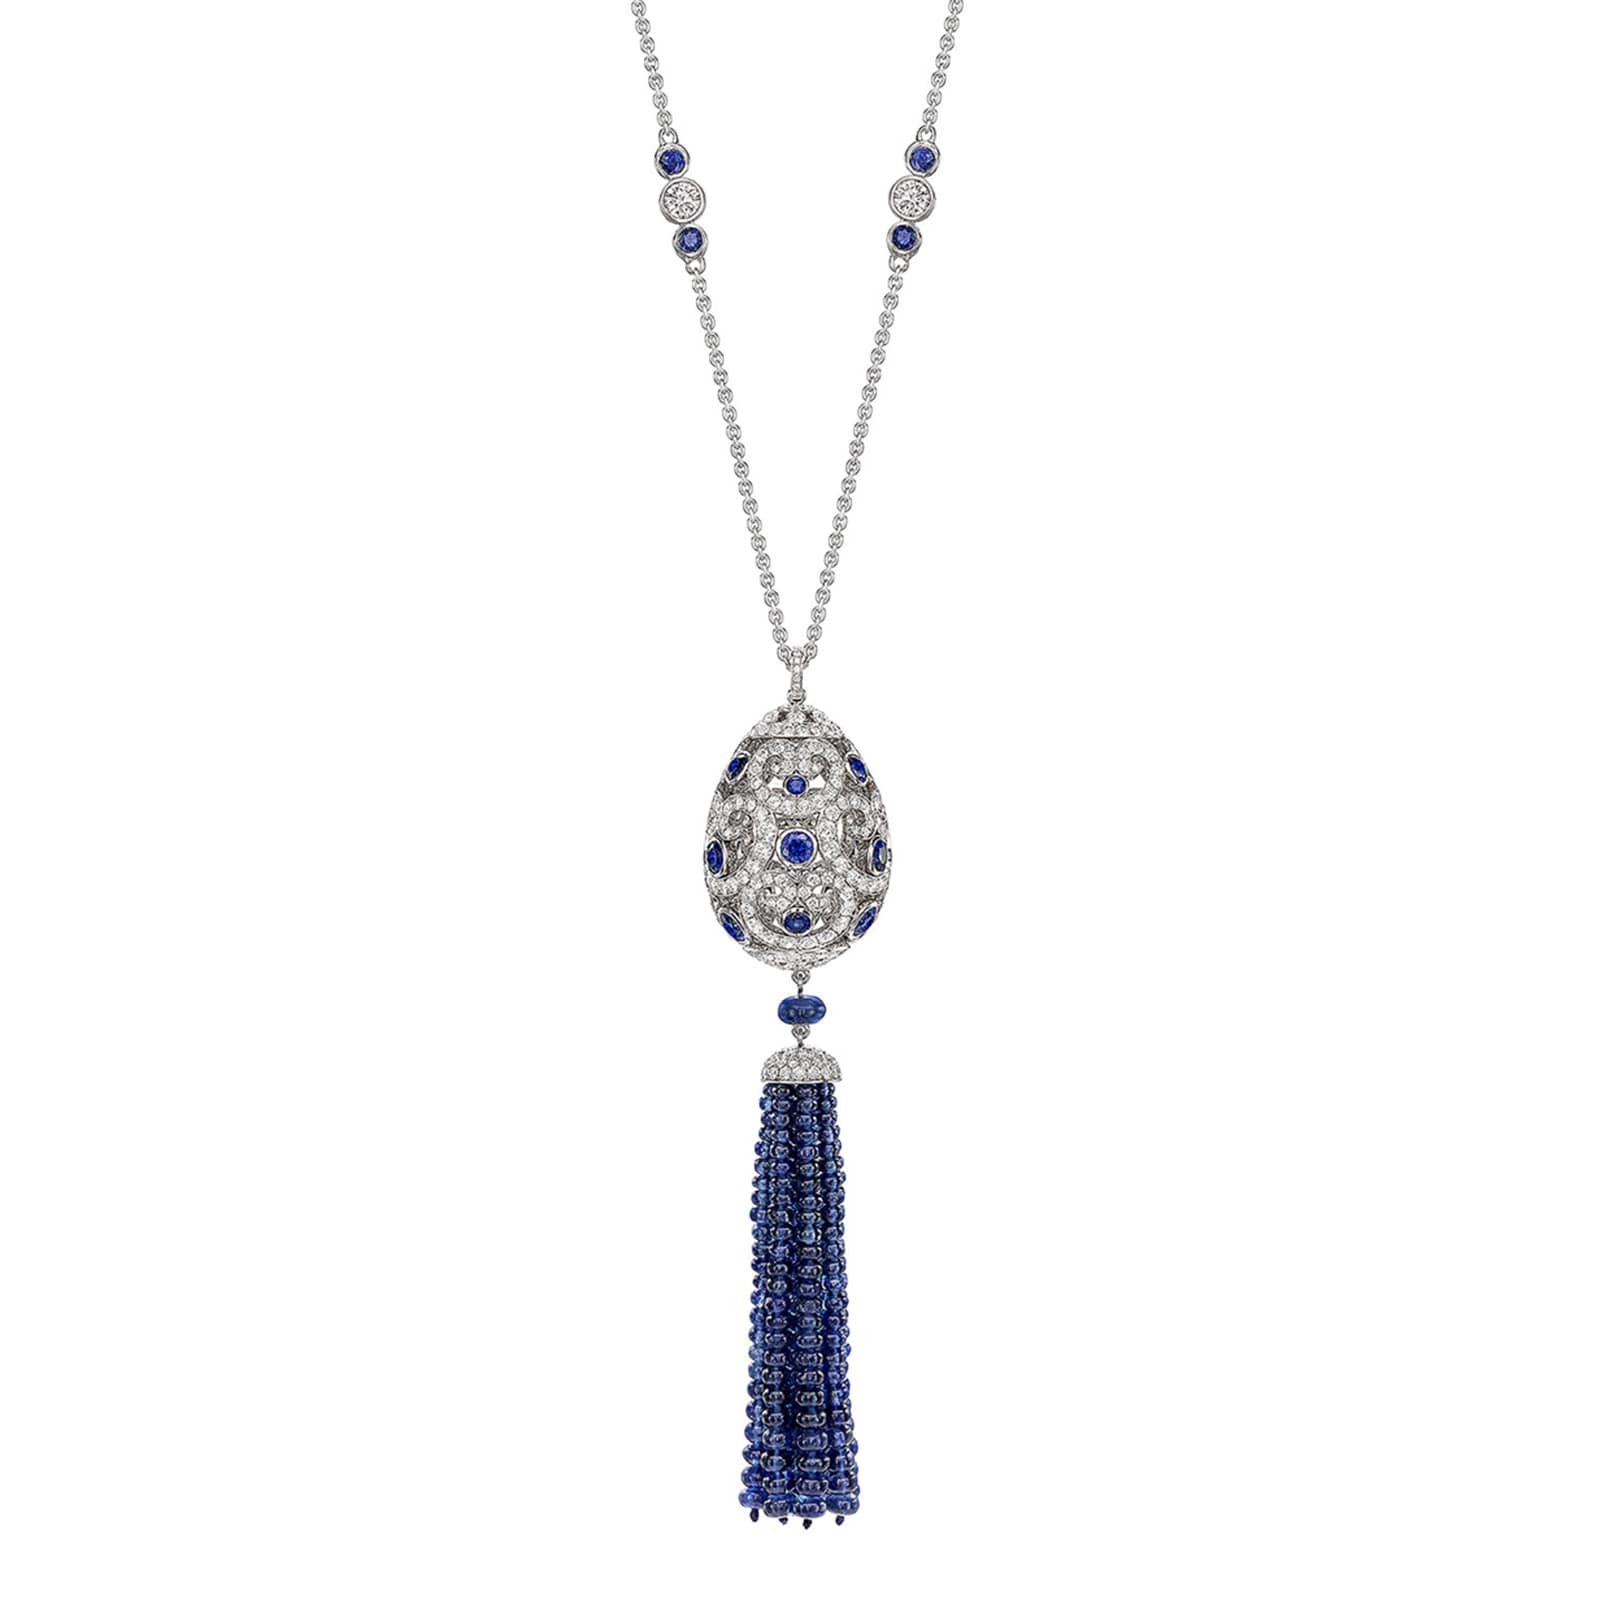 Faberge Imperial Imperatrice 18ct White Gold & Blue Sapphire Tassel Pendant